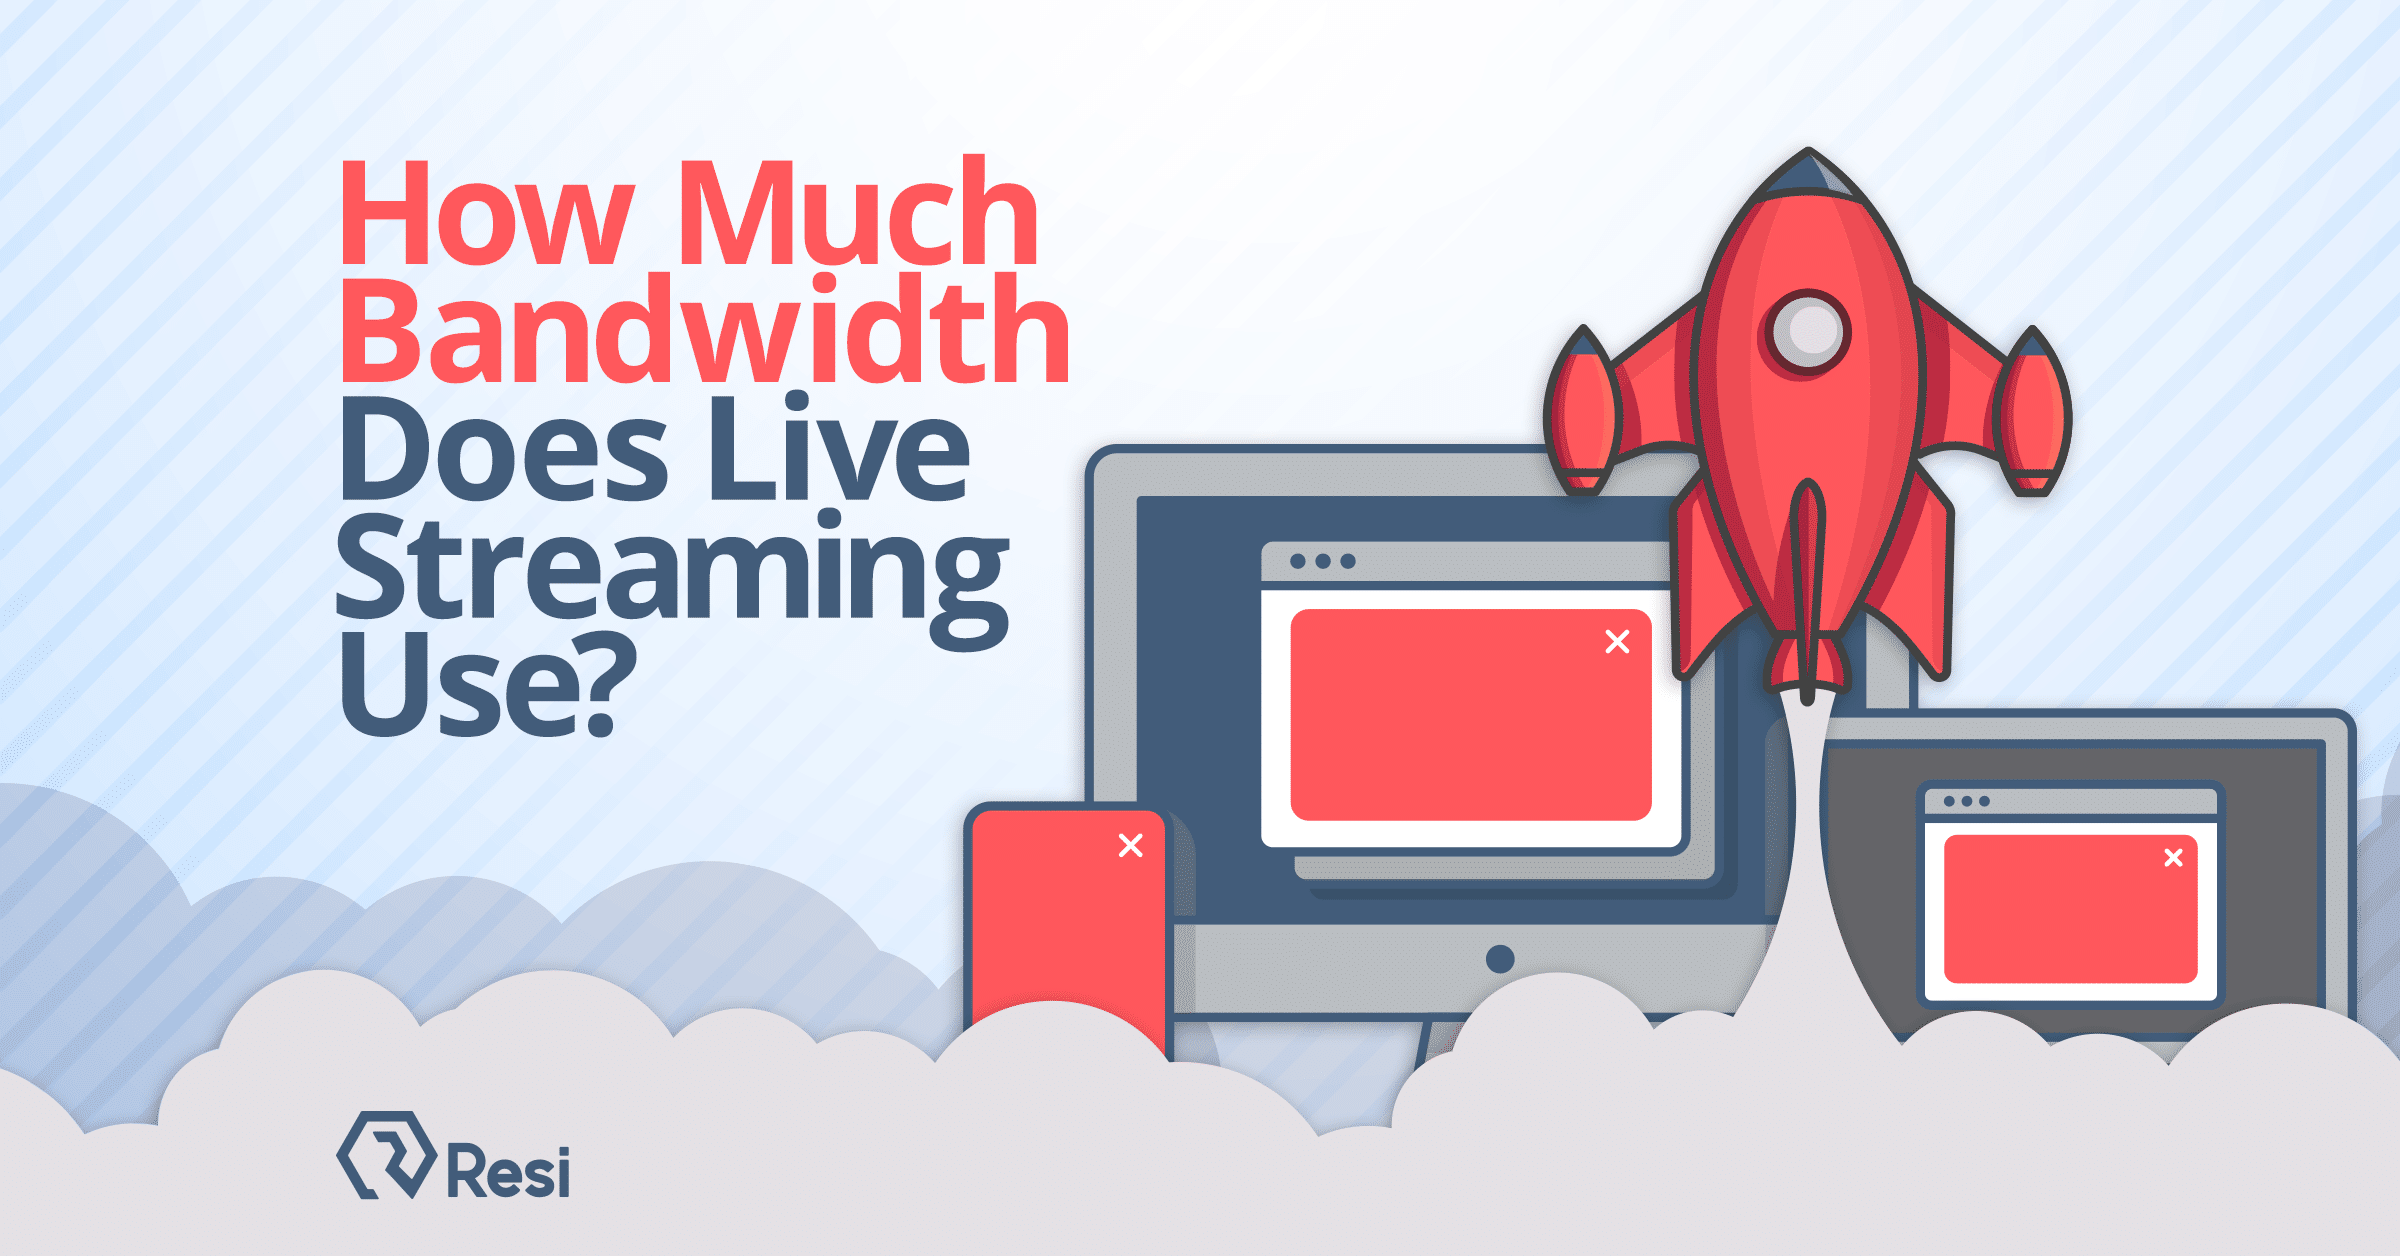 How Much Bandwidth Does Livestreaming Use?